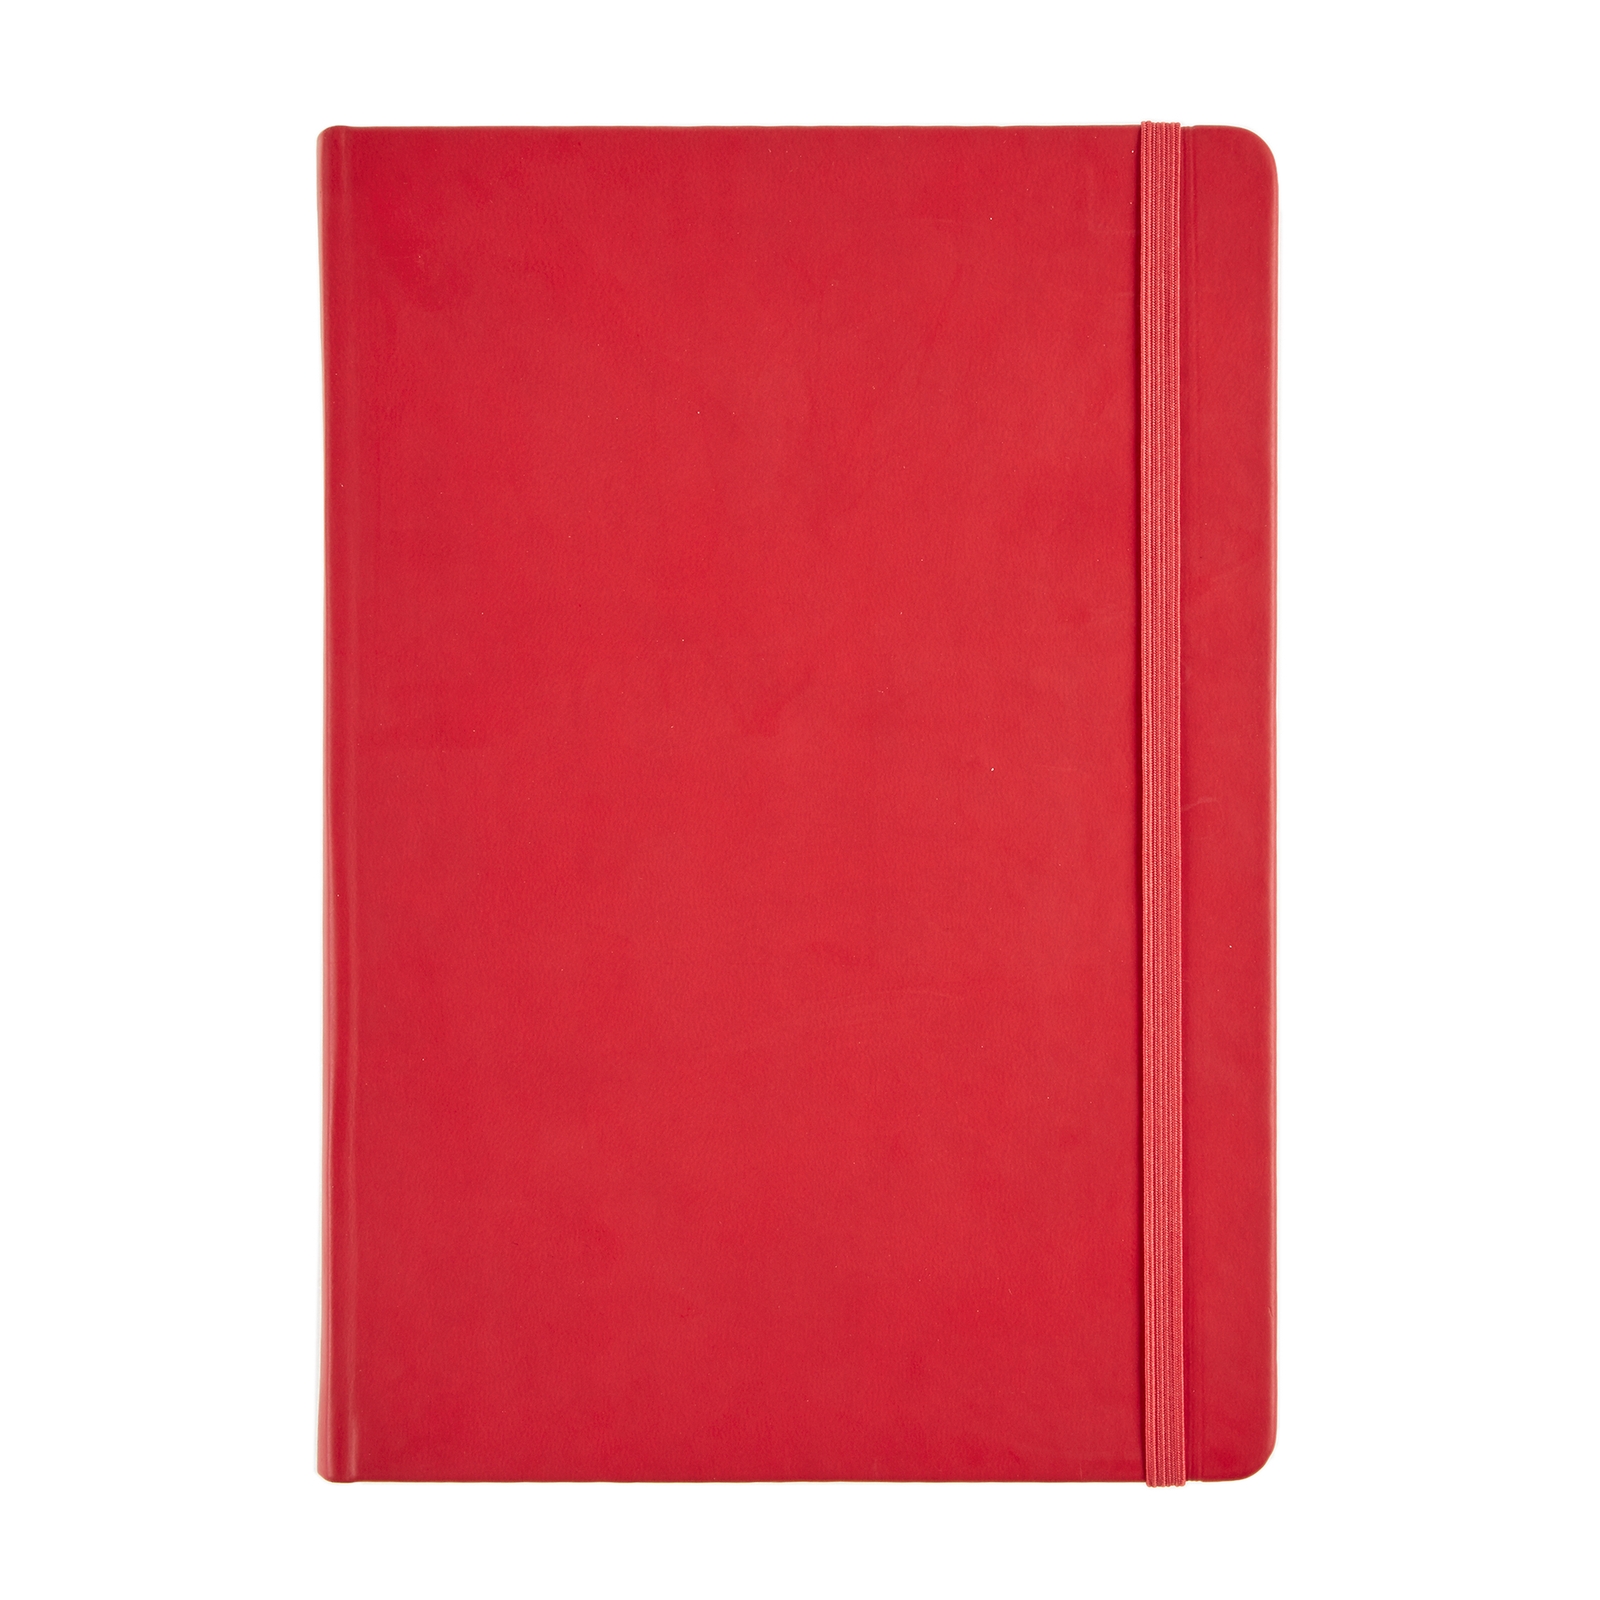 Collins A5 Hardback Notebook - Red